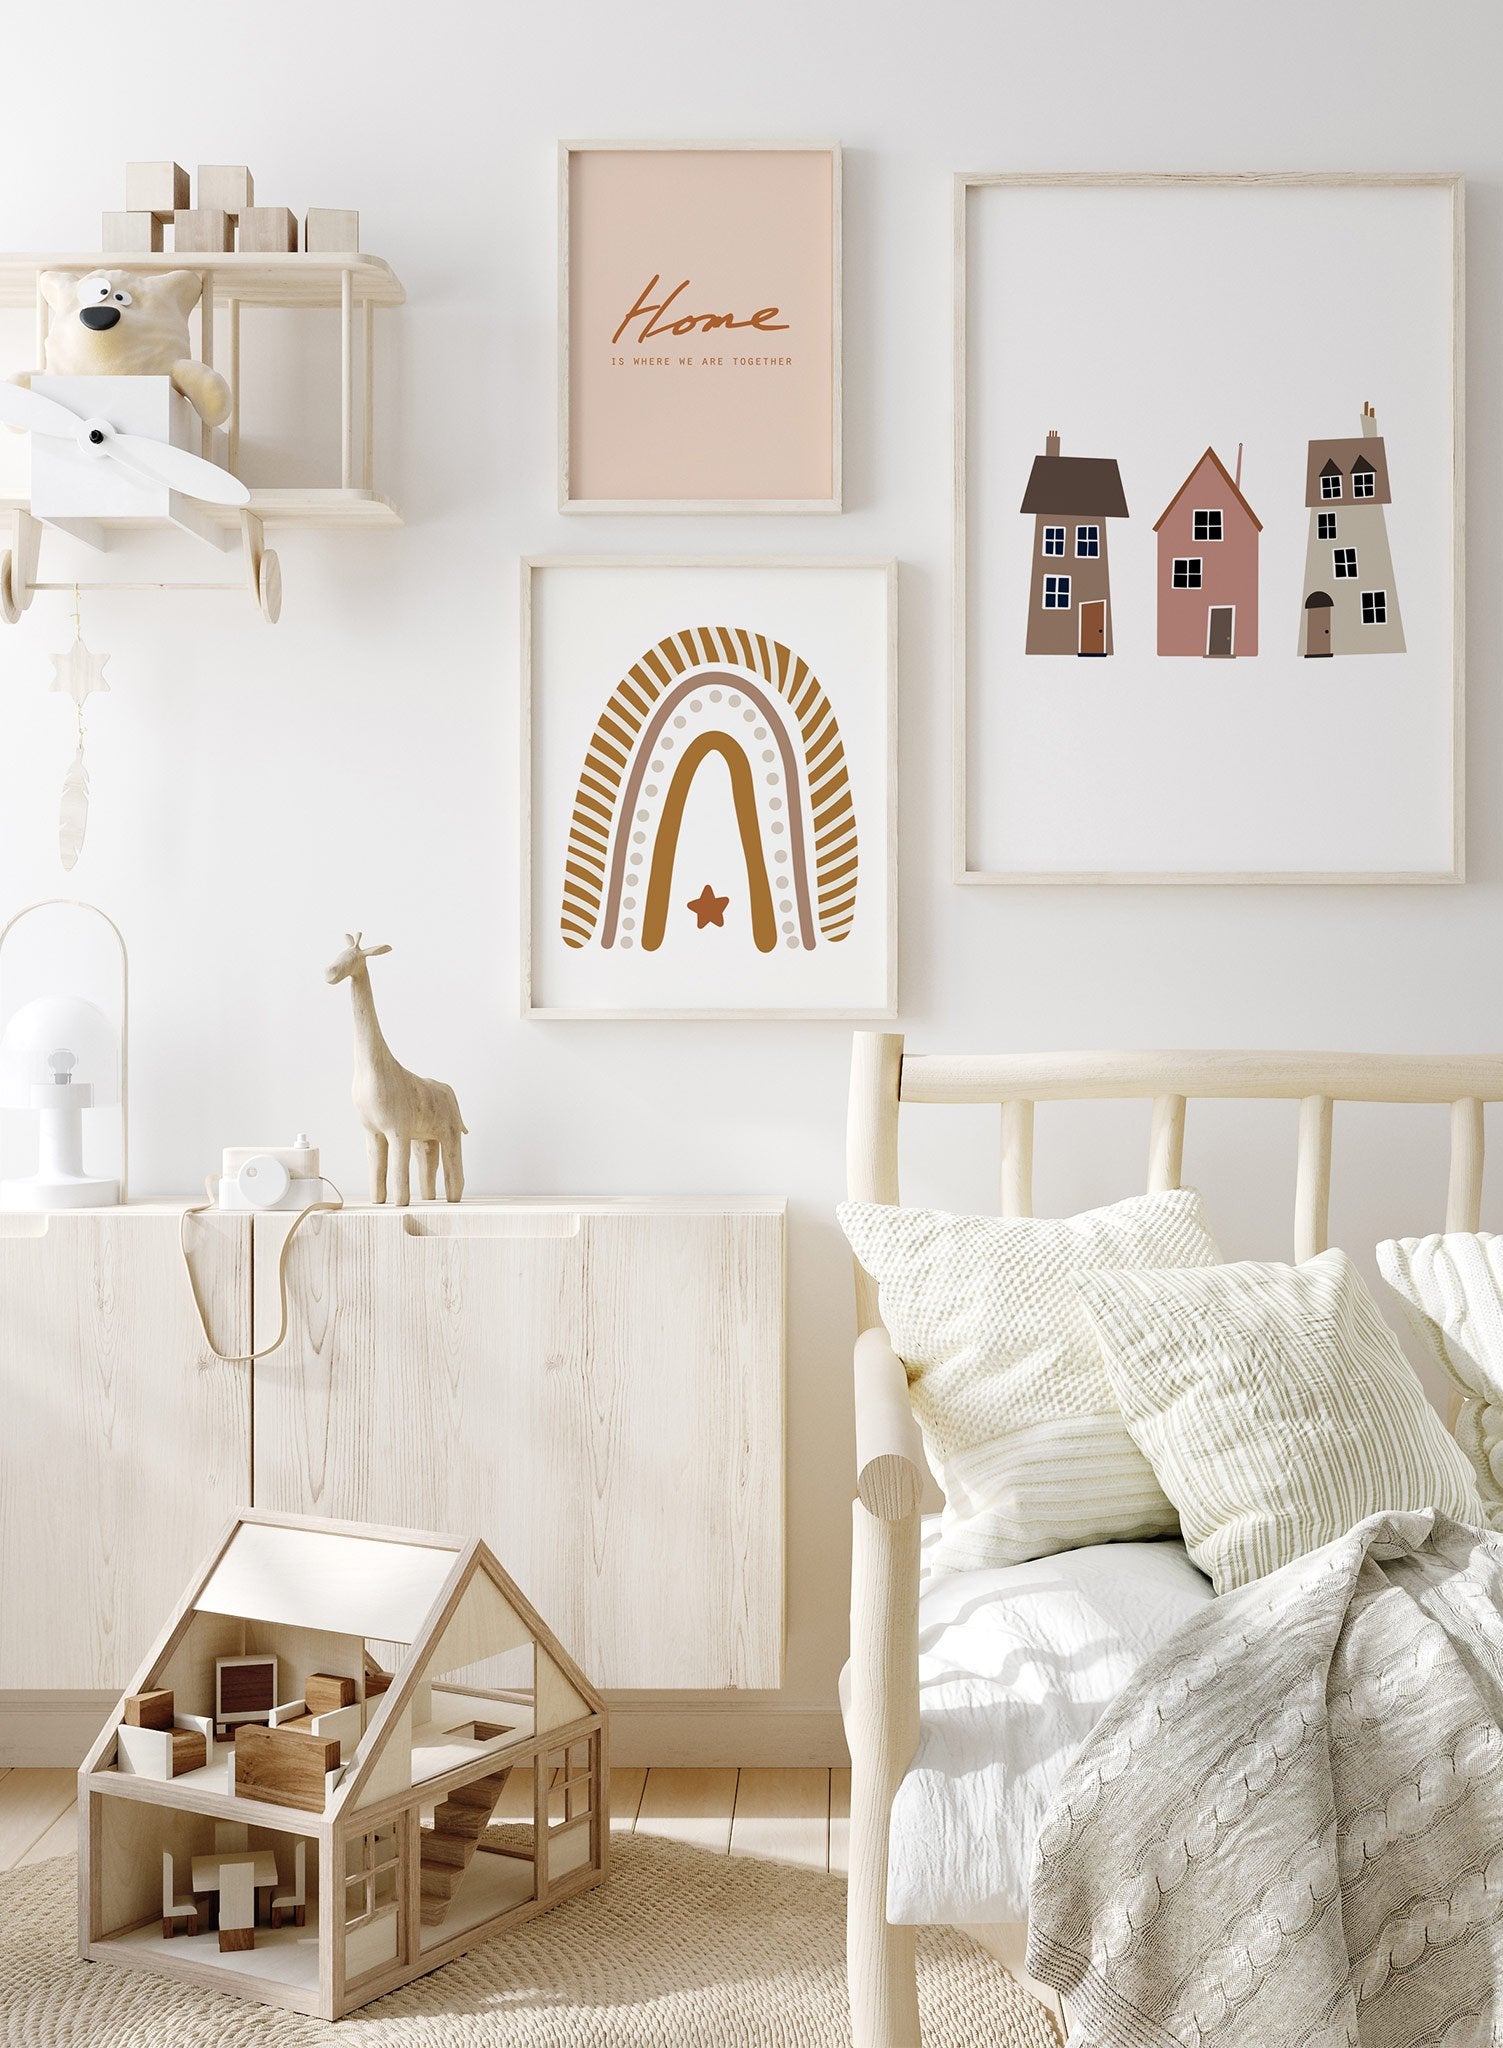 Kids nursery poster by Opposite Wall with trio of houses illustration - Lifestyle Gallery Trio - Kids Bedroom